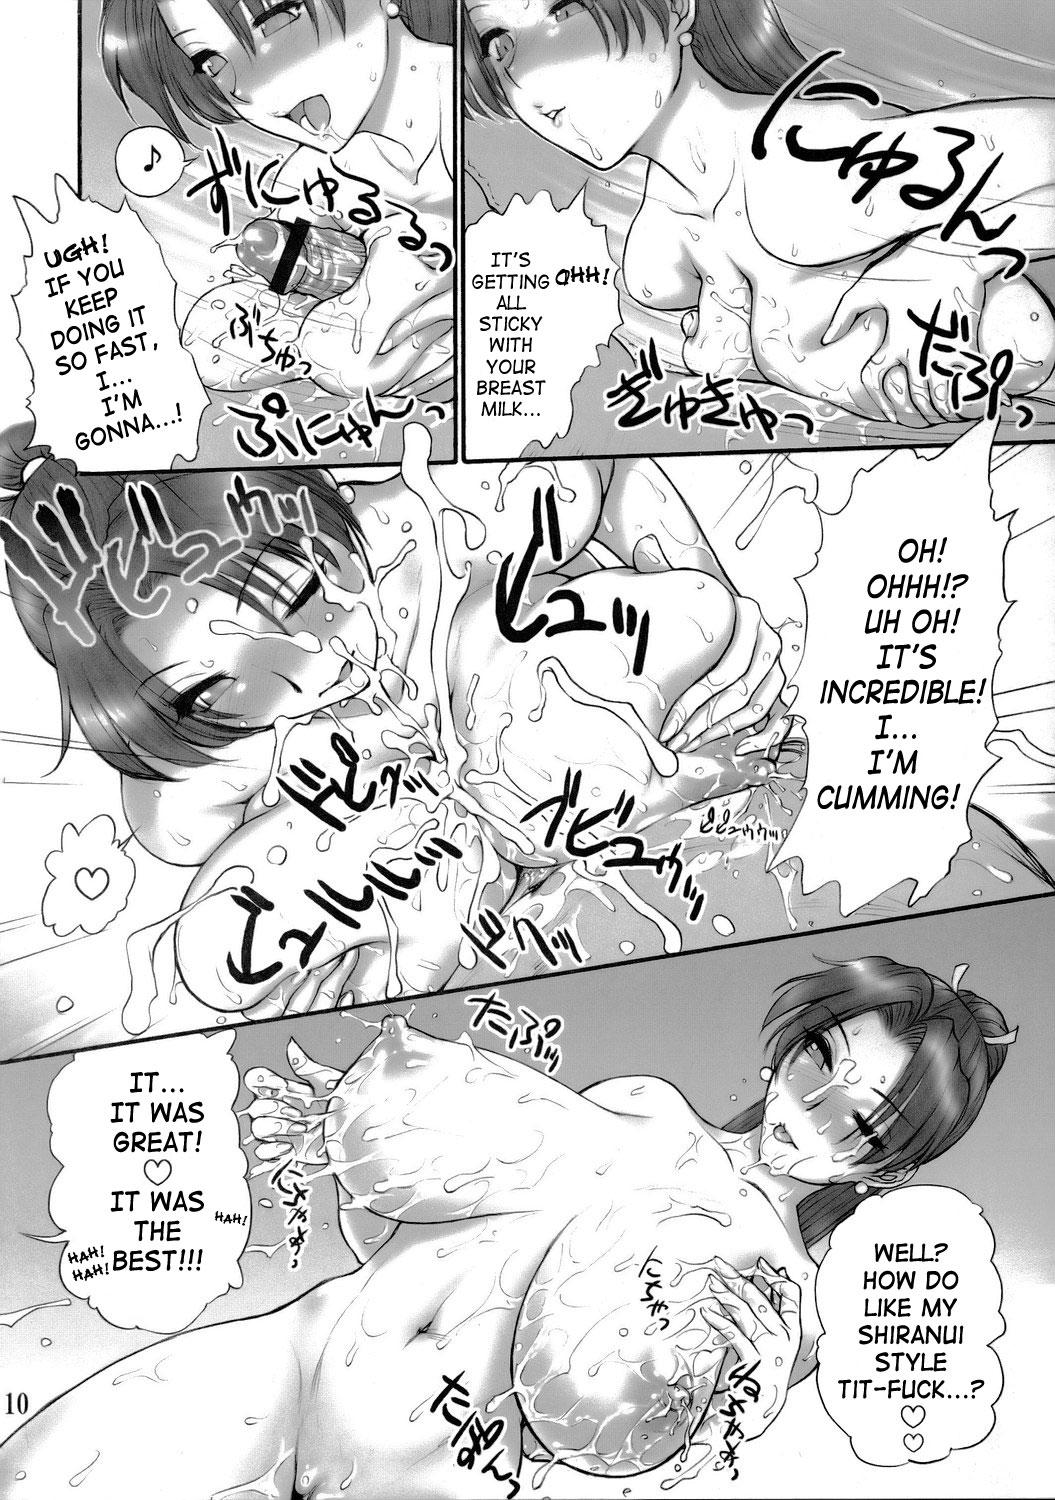 Teenie (SC29) [Shinnihon Pepsitou (St. Germain-sal)] Report Concerning Kyoku-gen-ryuu (The King of Fighters) [English] [SaHa] - King of fighters Boquete - Page 11